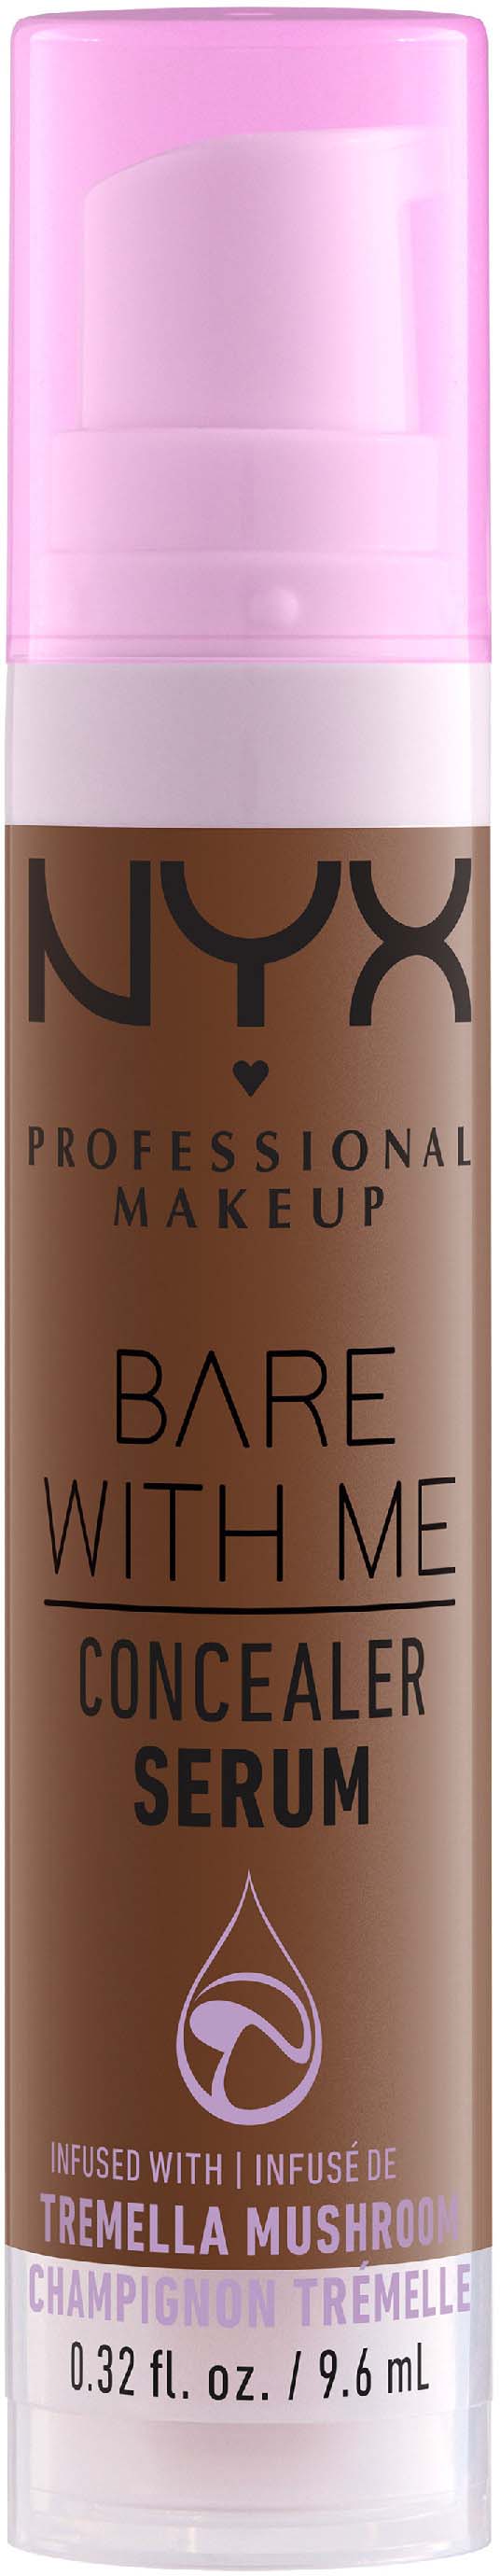 NYX PROFESSIONAL MAKEUP Bare With Me Concealer Serum Rich